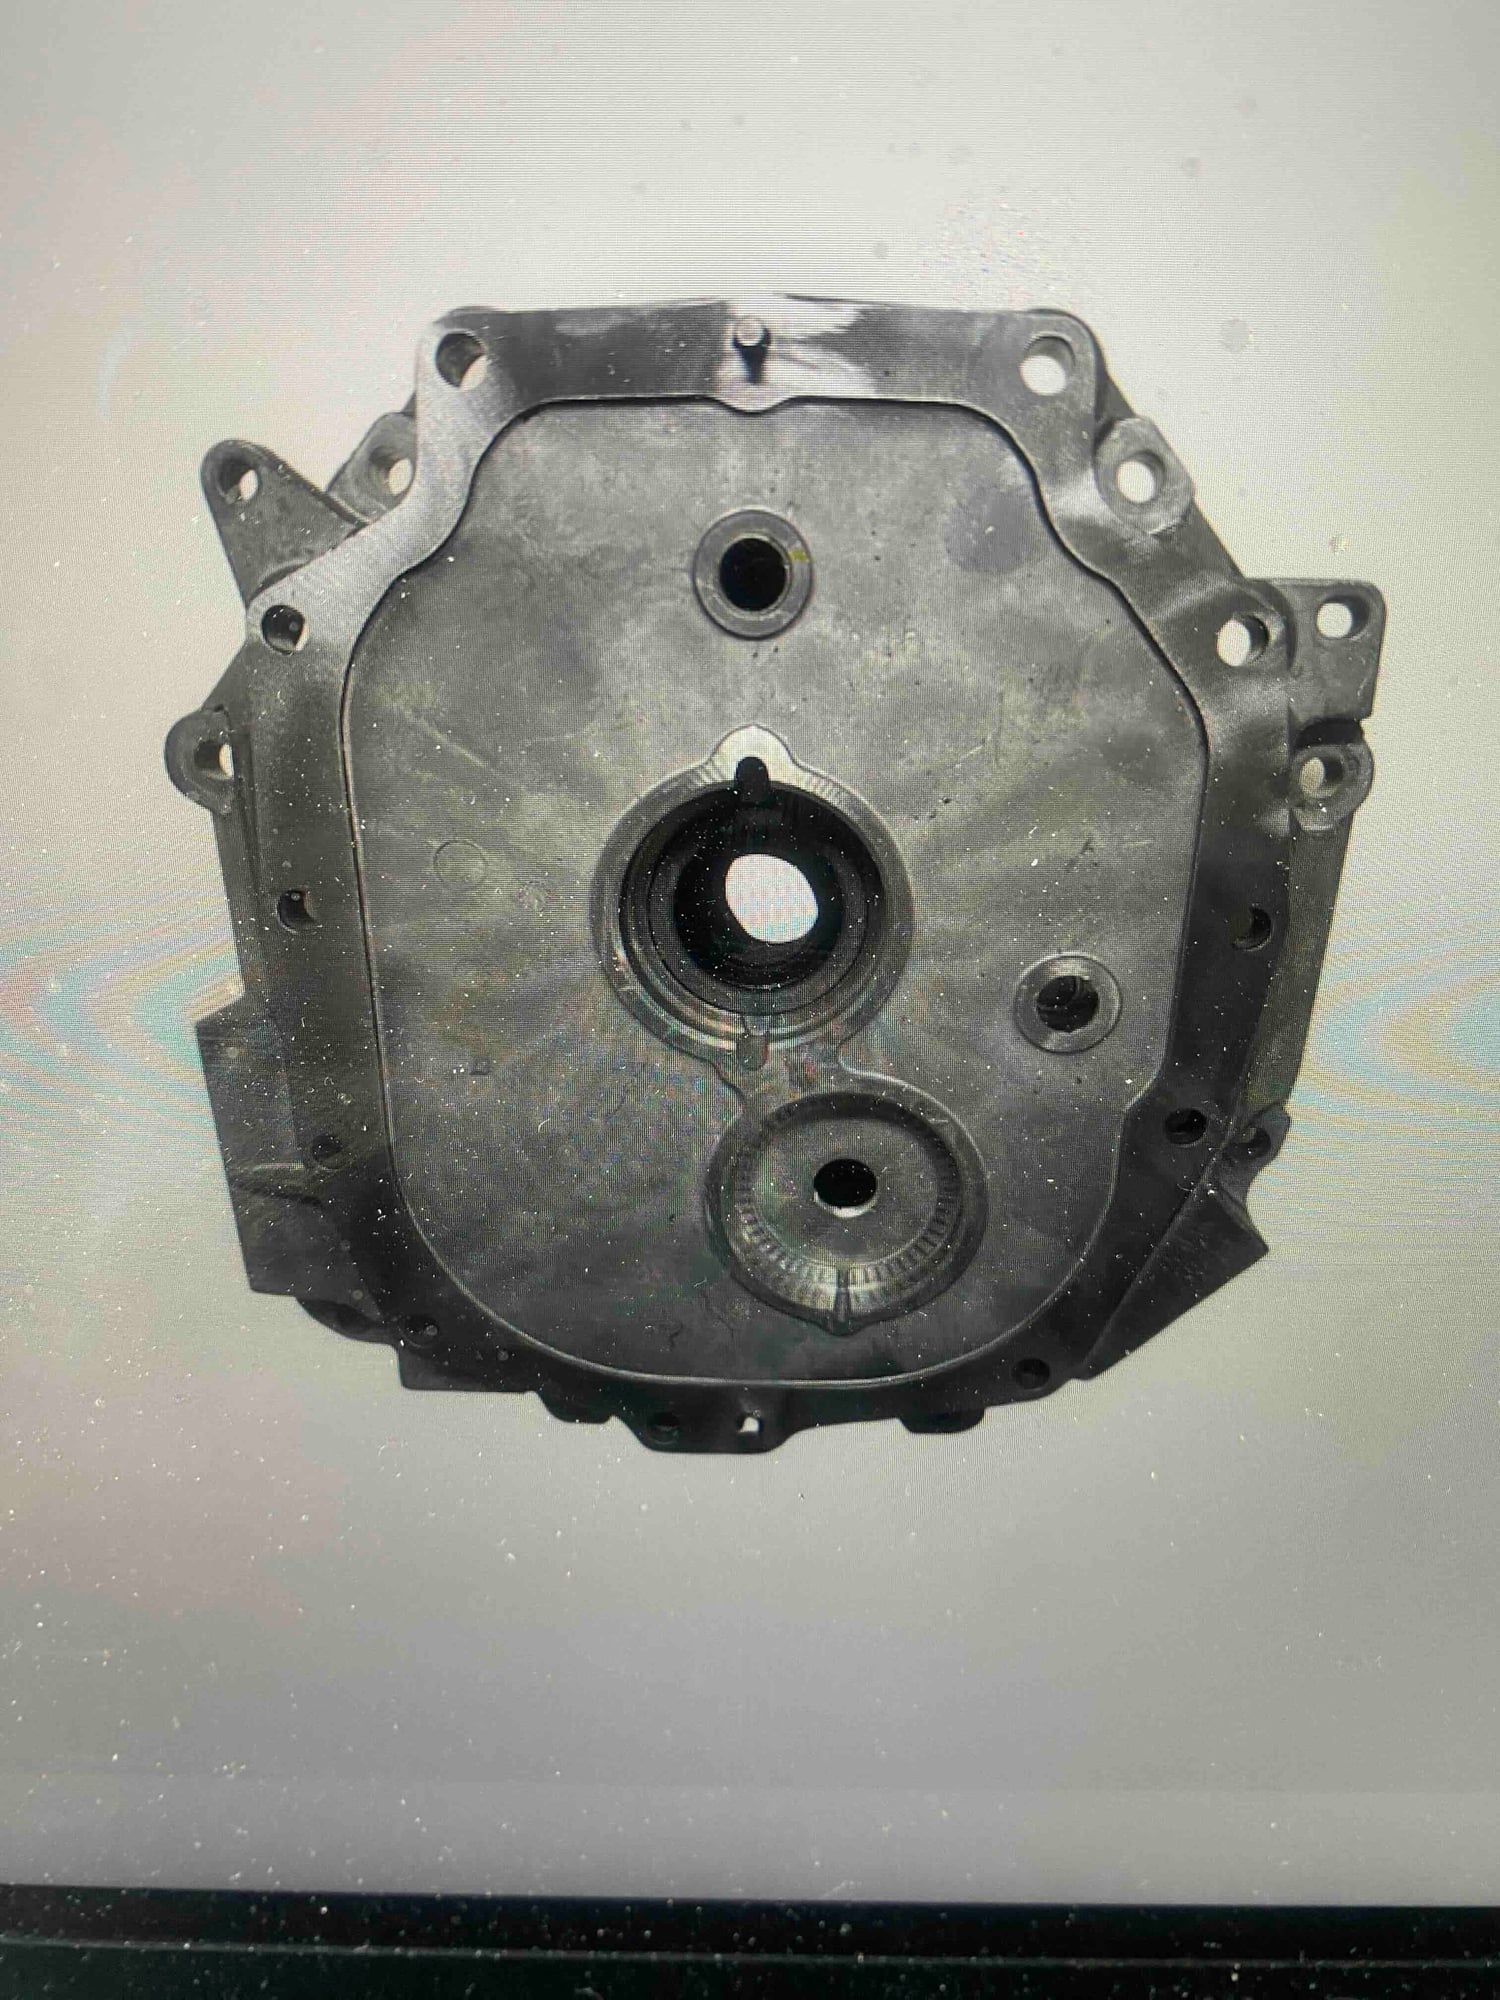 Drivetrain - Looking for a T56 LT1 or LS1 transmission front Plate AKA midplate - Used - -1 to 2025  All Models - Los Angeles, CA 90024, United States